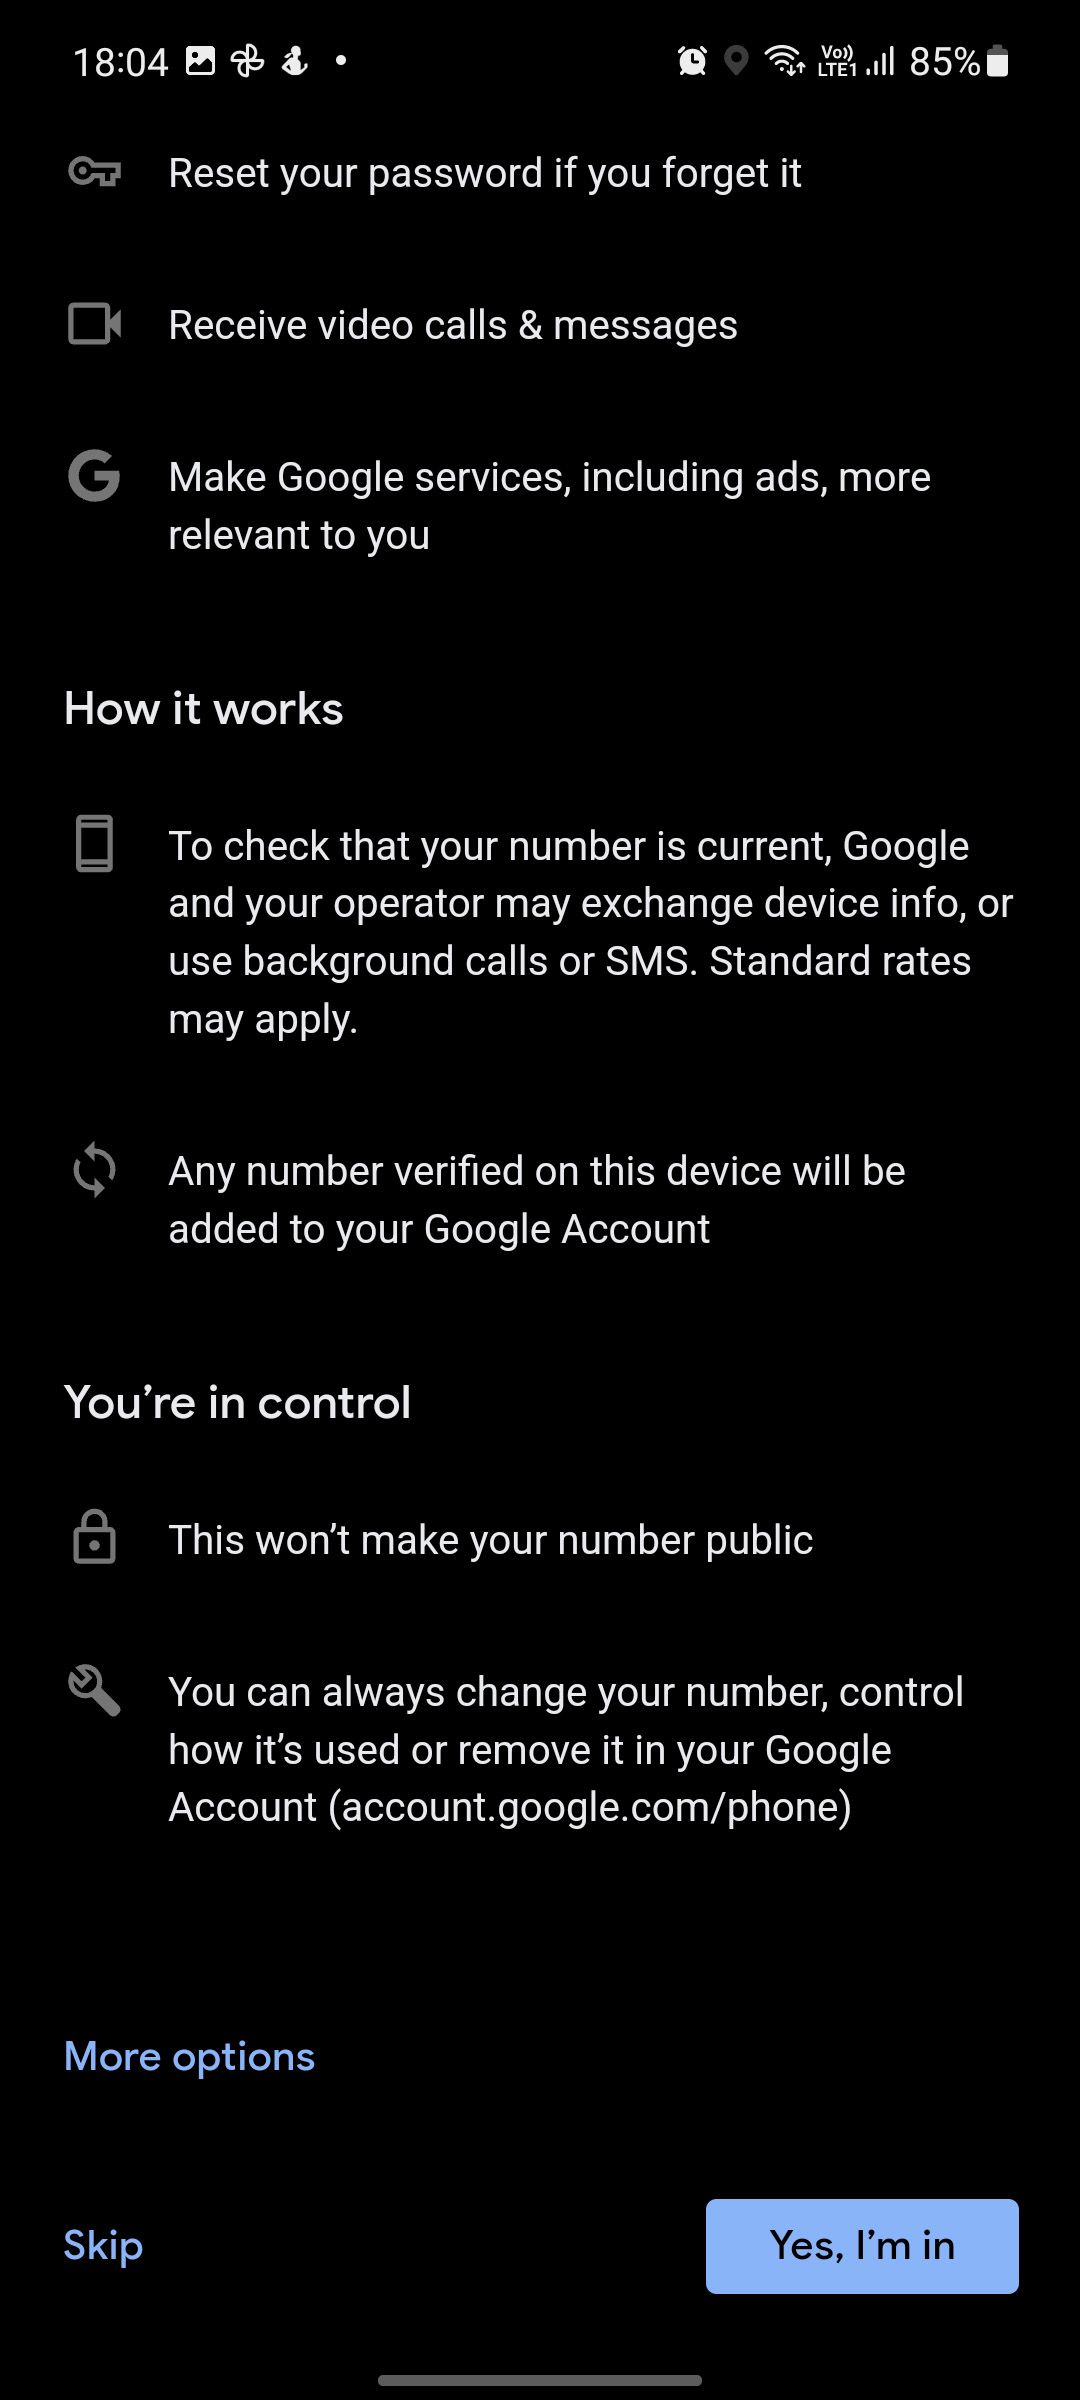 How to set up a new Google account on Android